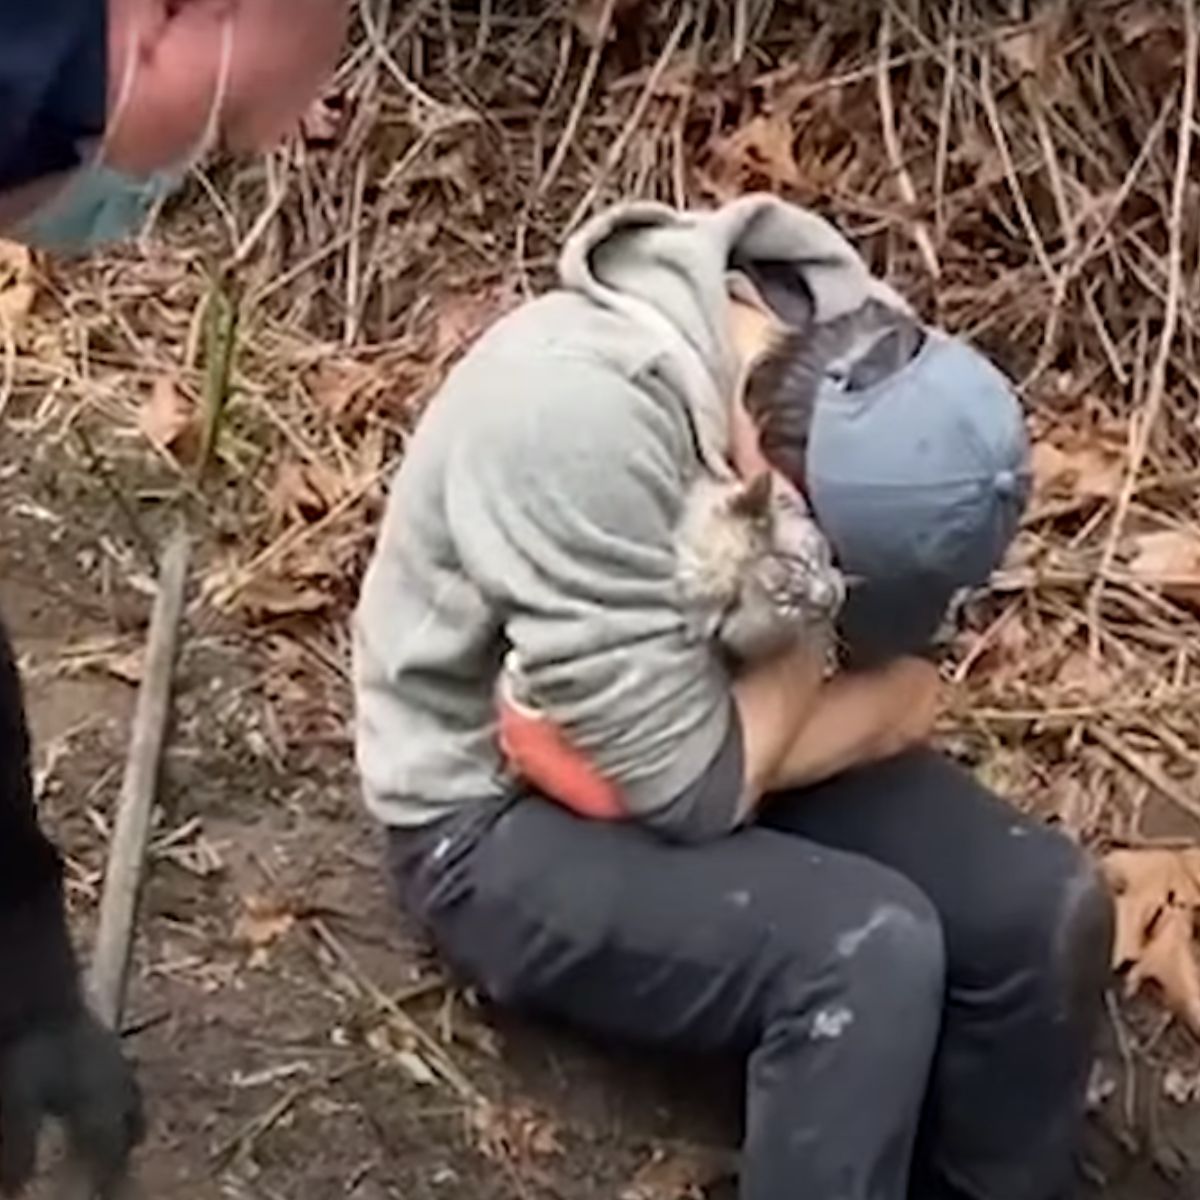 man hugging the rescued cat